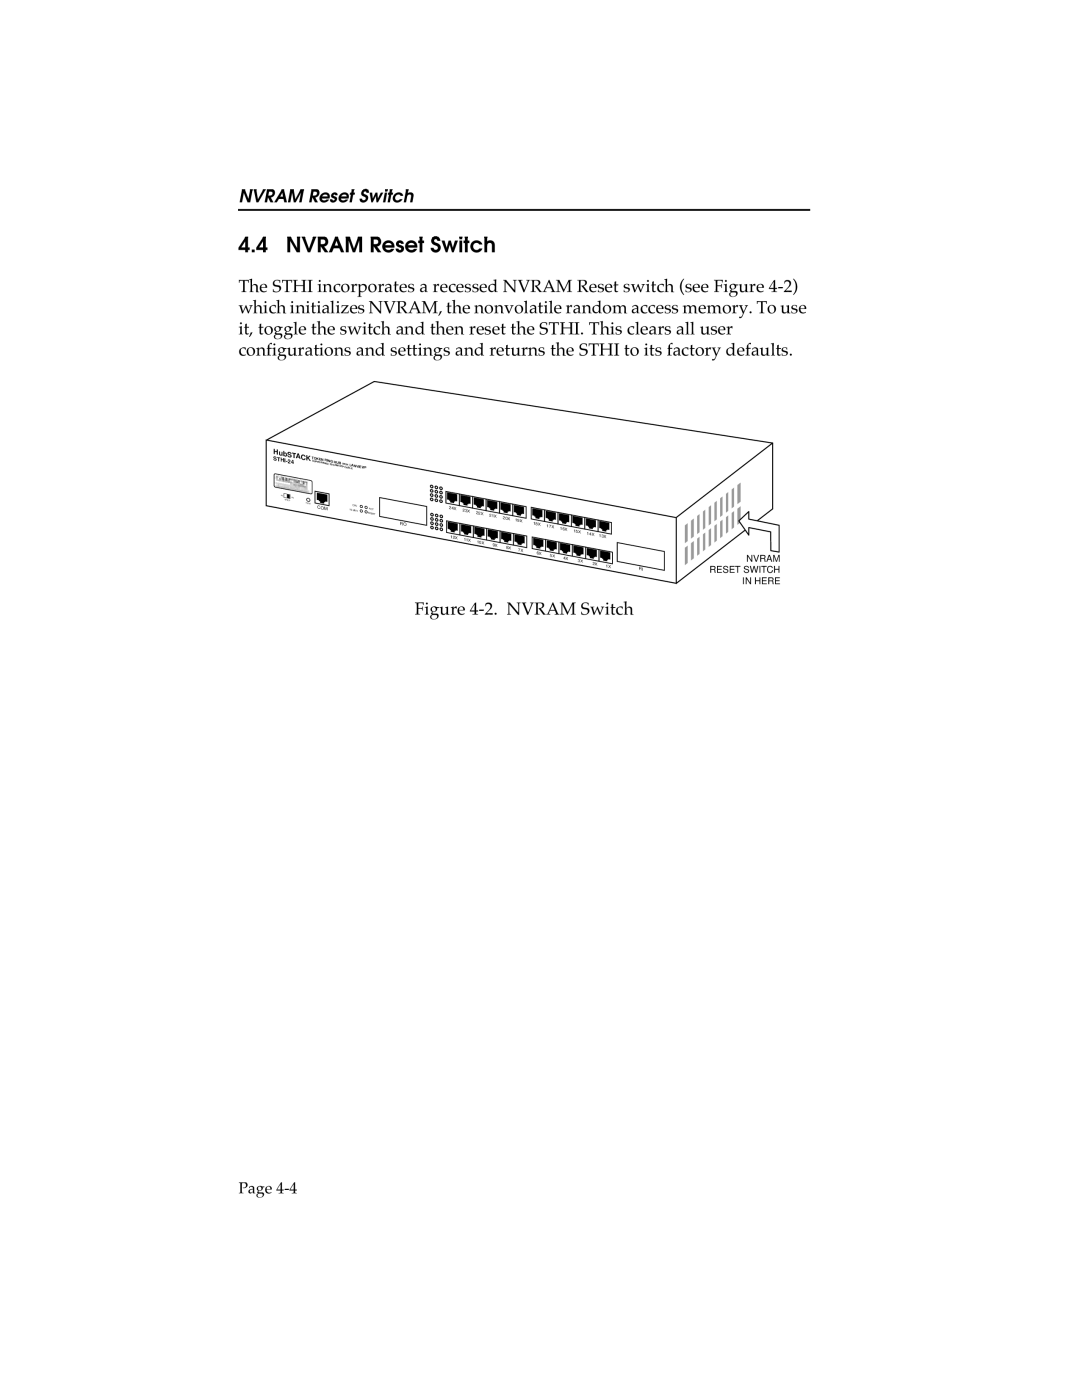 Cabletron Systems STHI manual NVRAM Reset Switch 